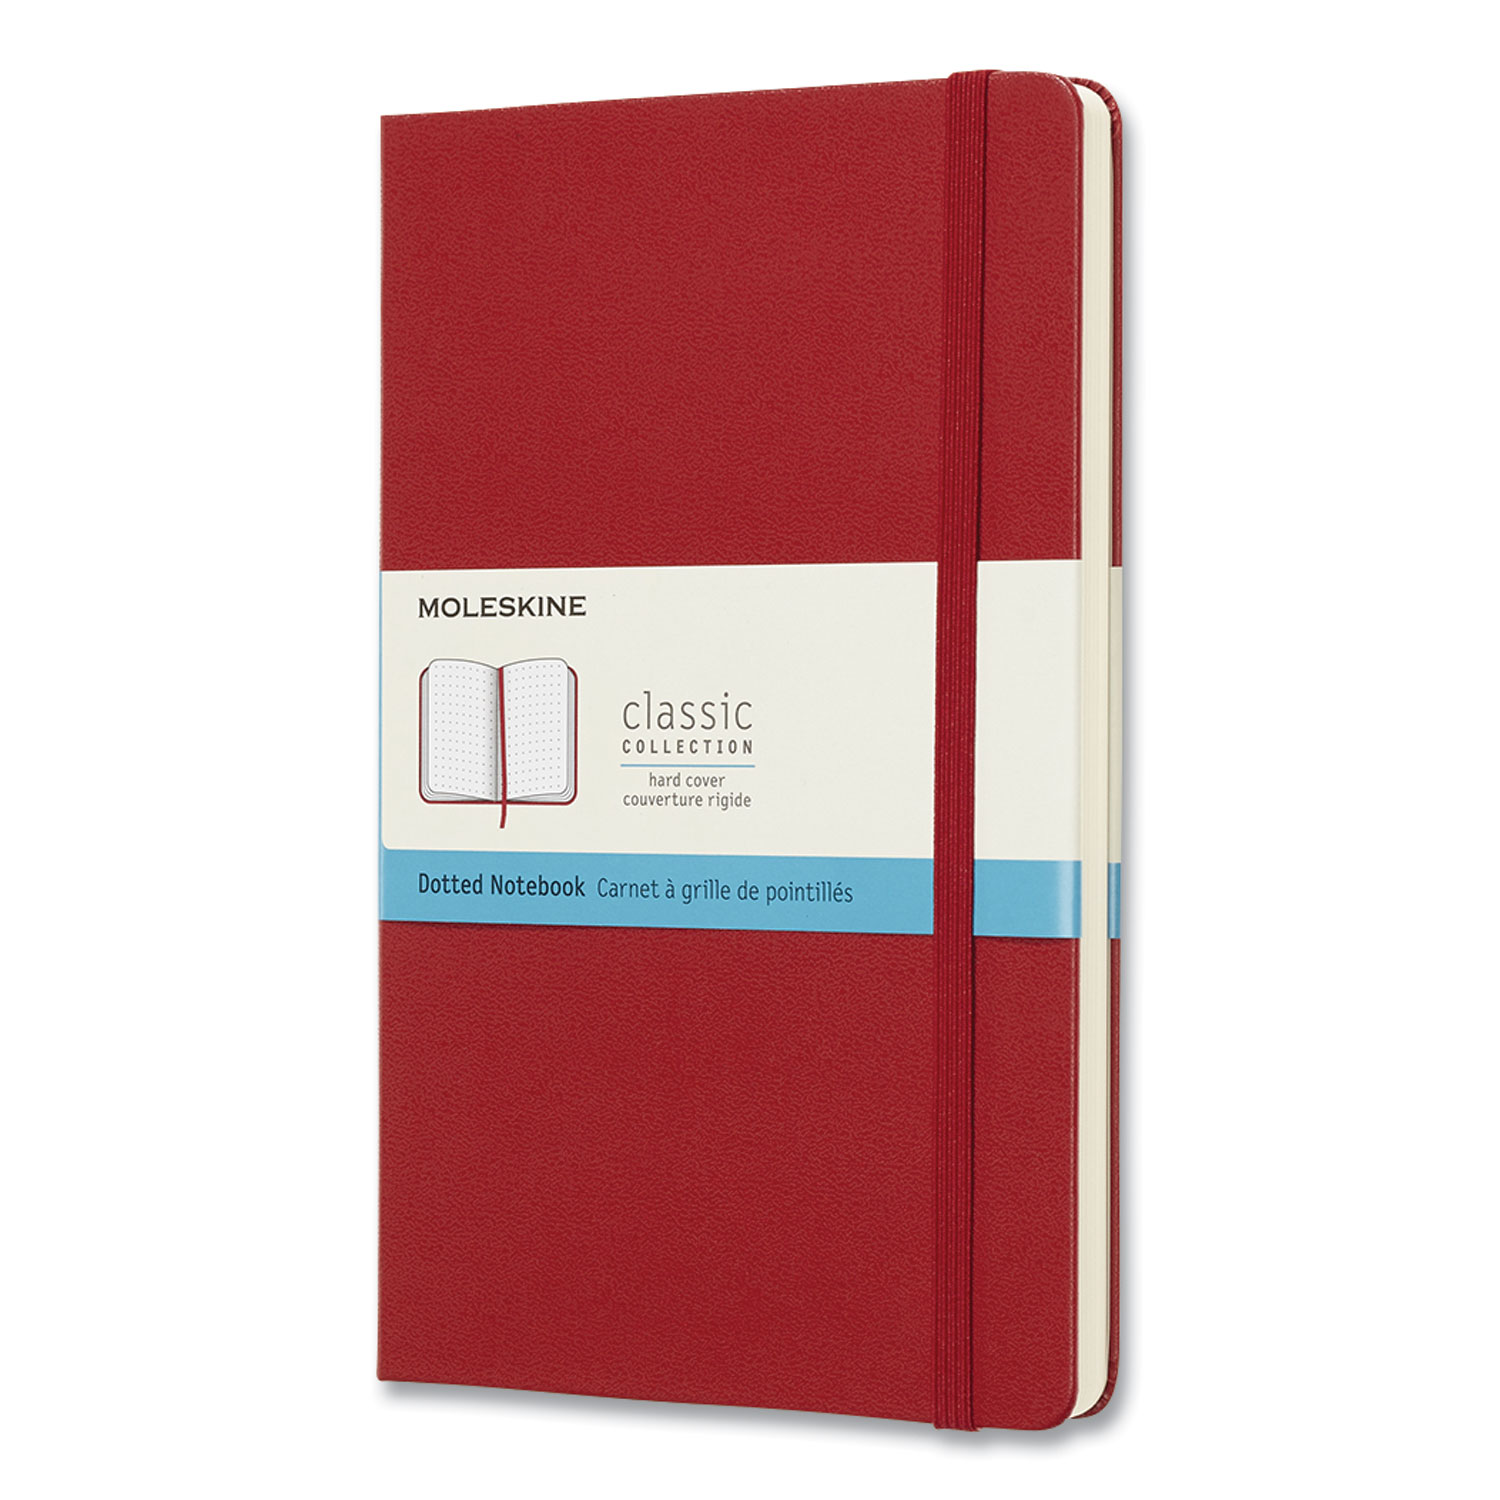 Moleskine® Classic Collection Hard Cover Notebook, Dotted Rule, Scarlet Red Cover, 5 x 8.25